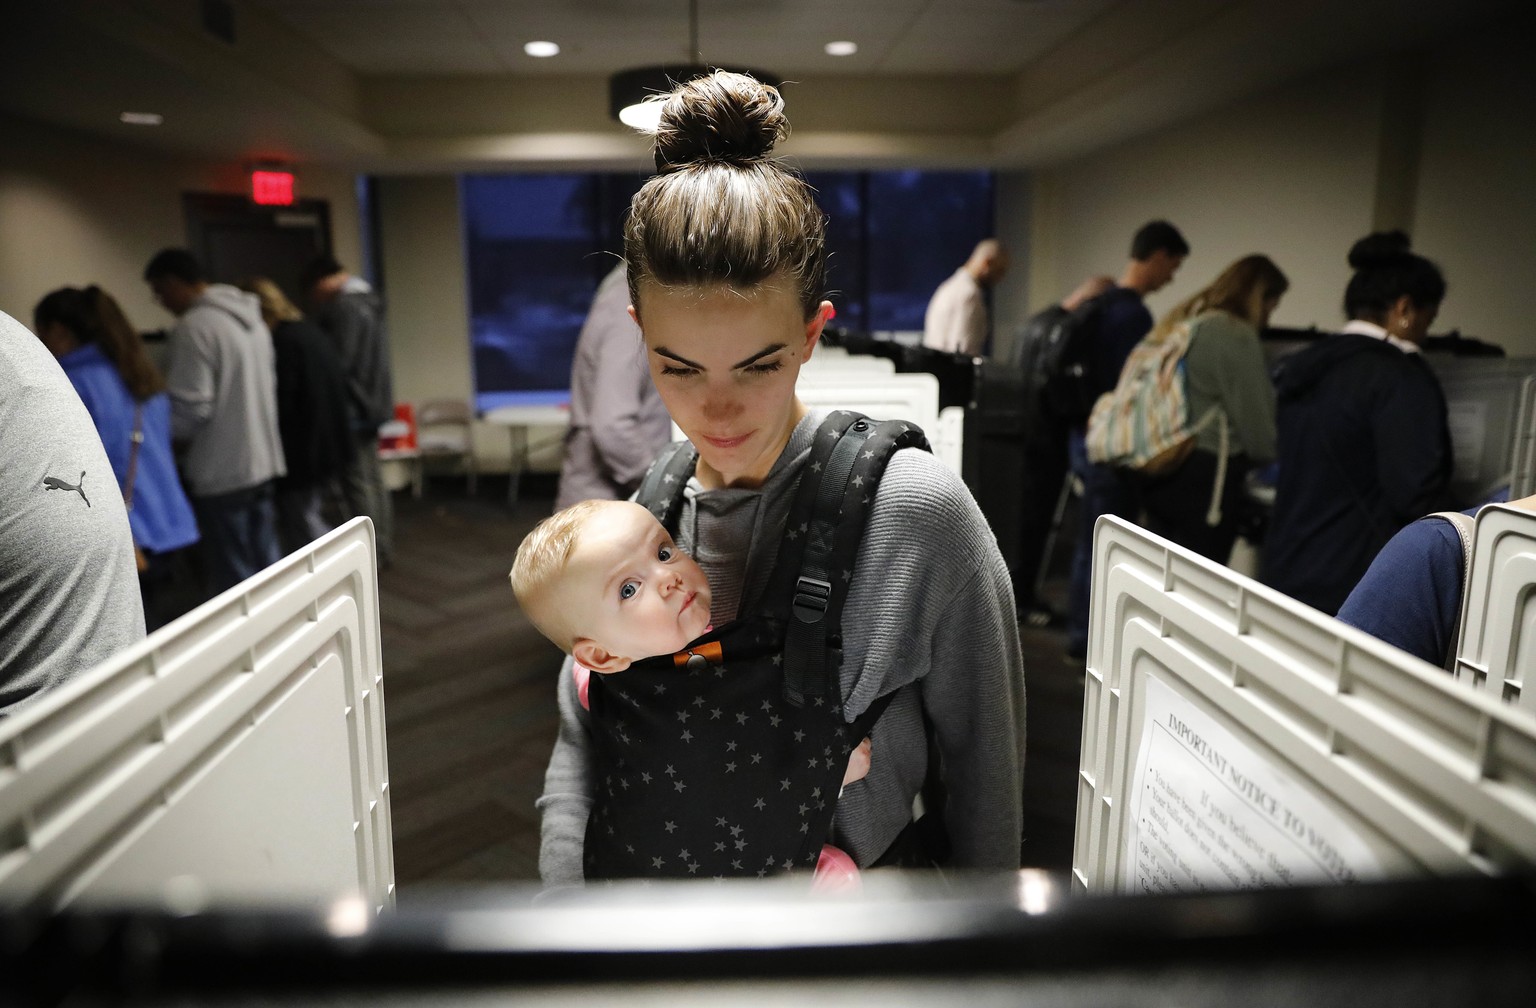 Kristen Leach votes with her six-month-old daughter, Nora, on election day in Atlanta, Tuesday, Nov. 6, 2018. (AP Photo/David Goldman)